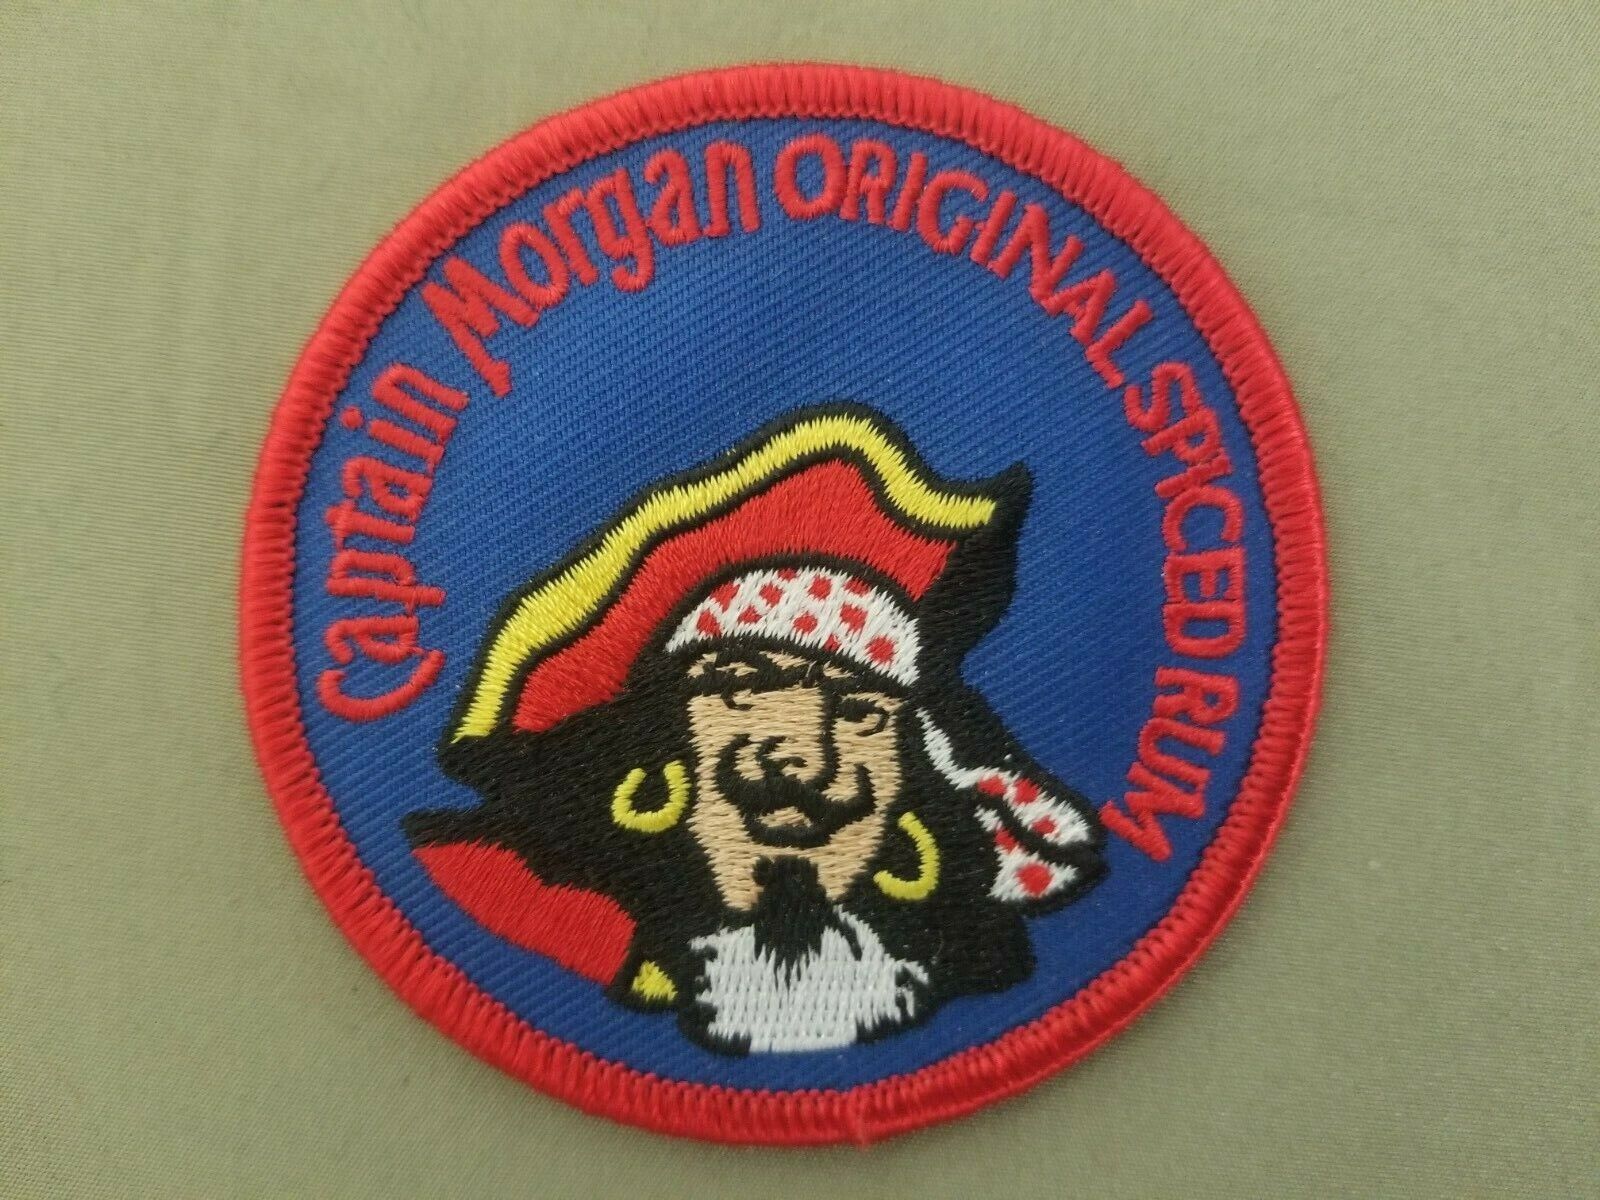 Captain Morgan Rum Embroidered Patch.